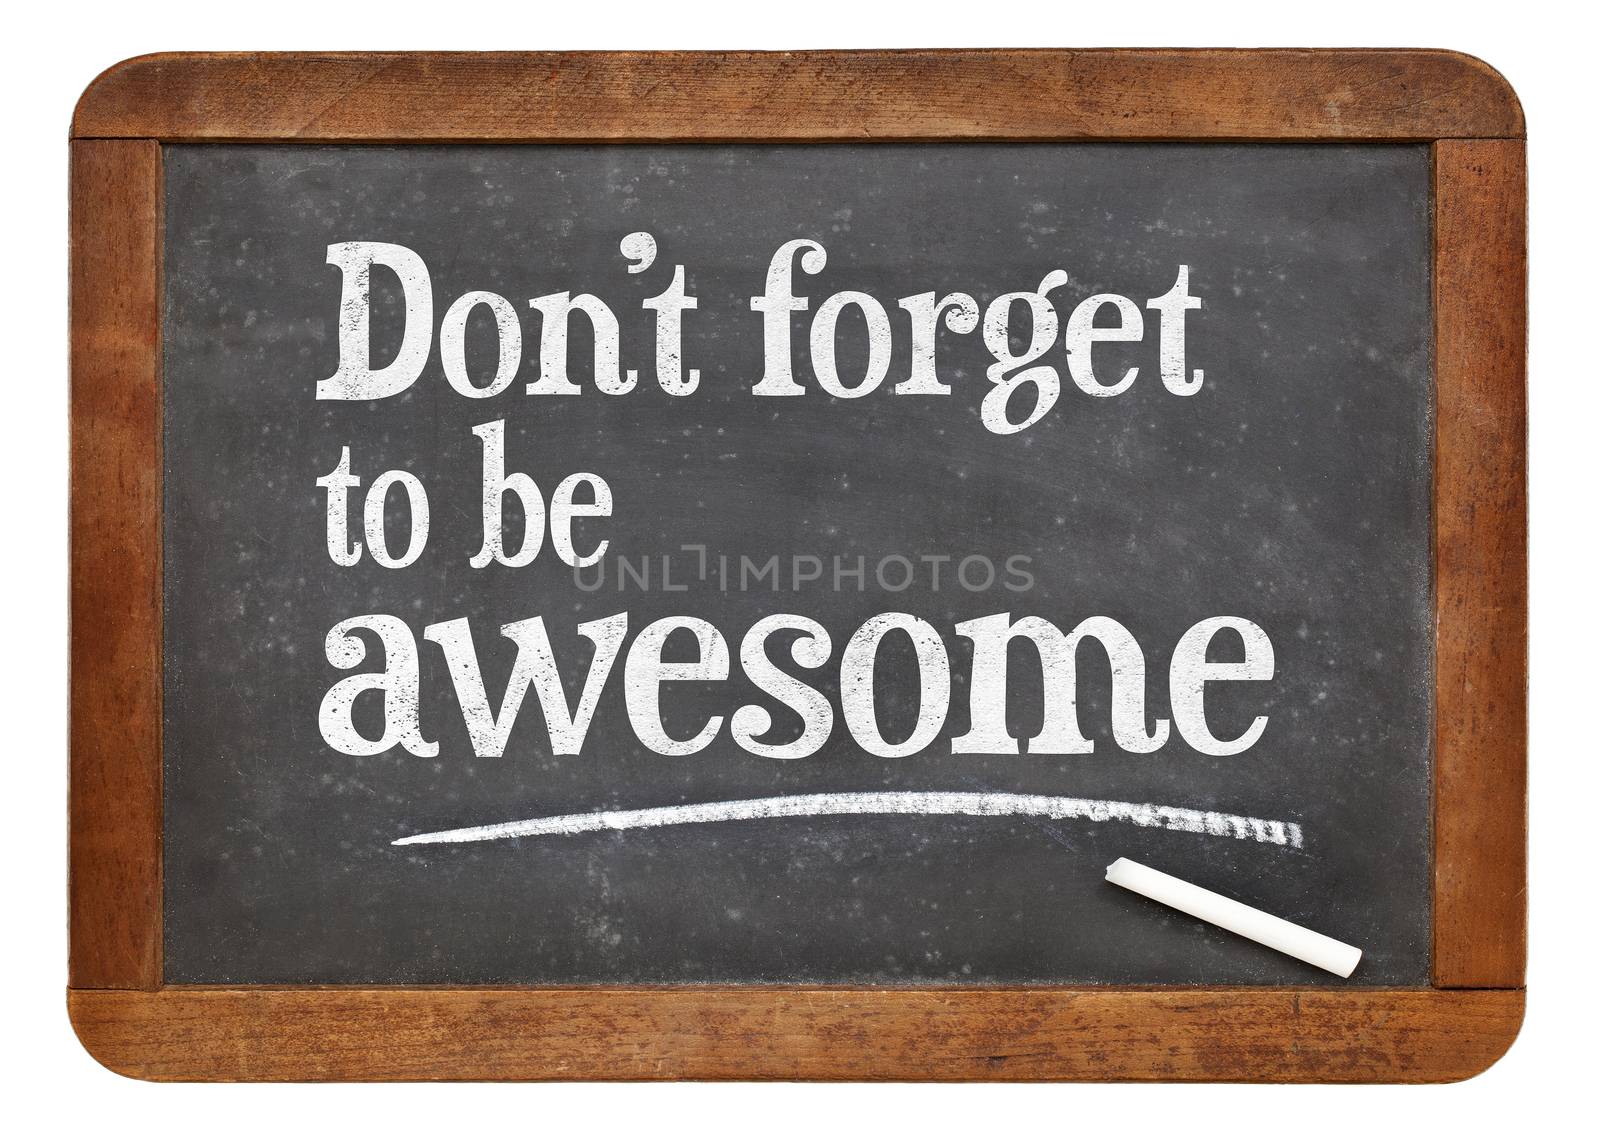 Do not forget to be awesome - inspirational reminder on a vintage slate blackboard